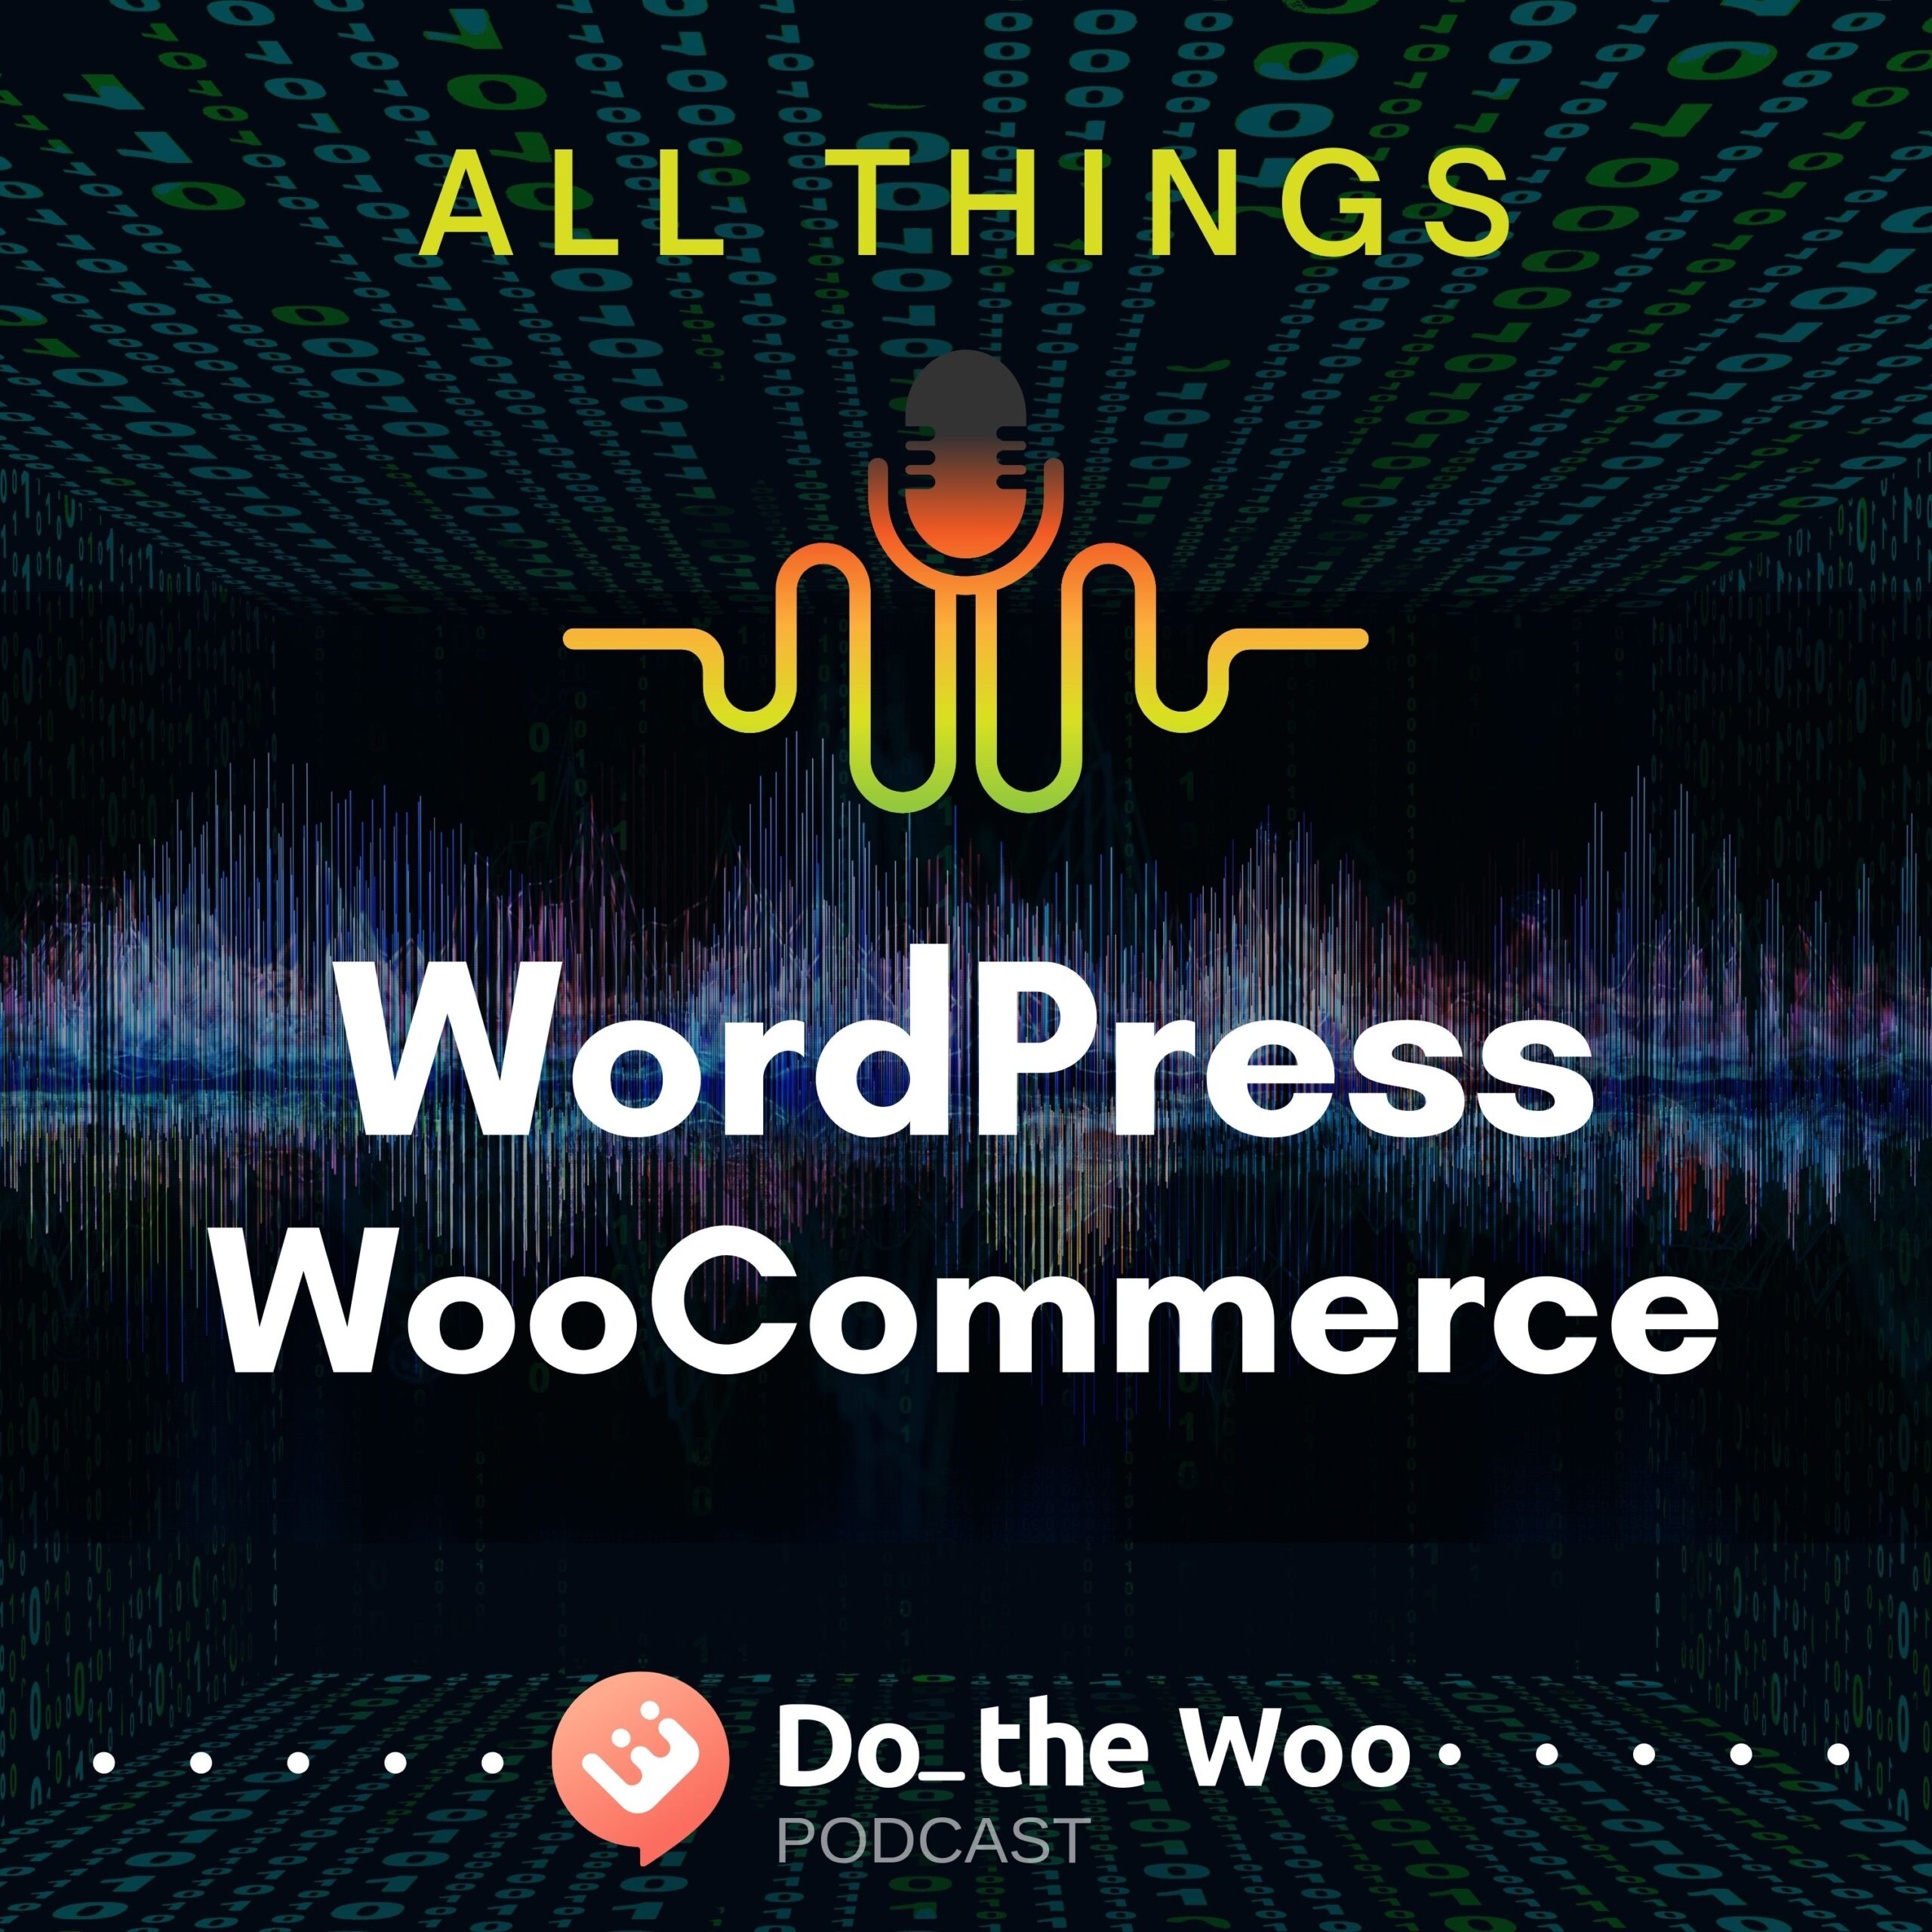 All Things WordPress with Mark Westguard